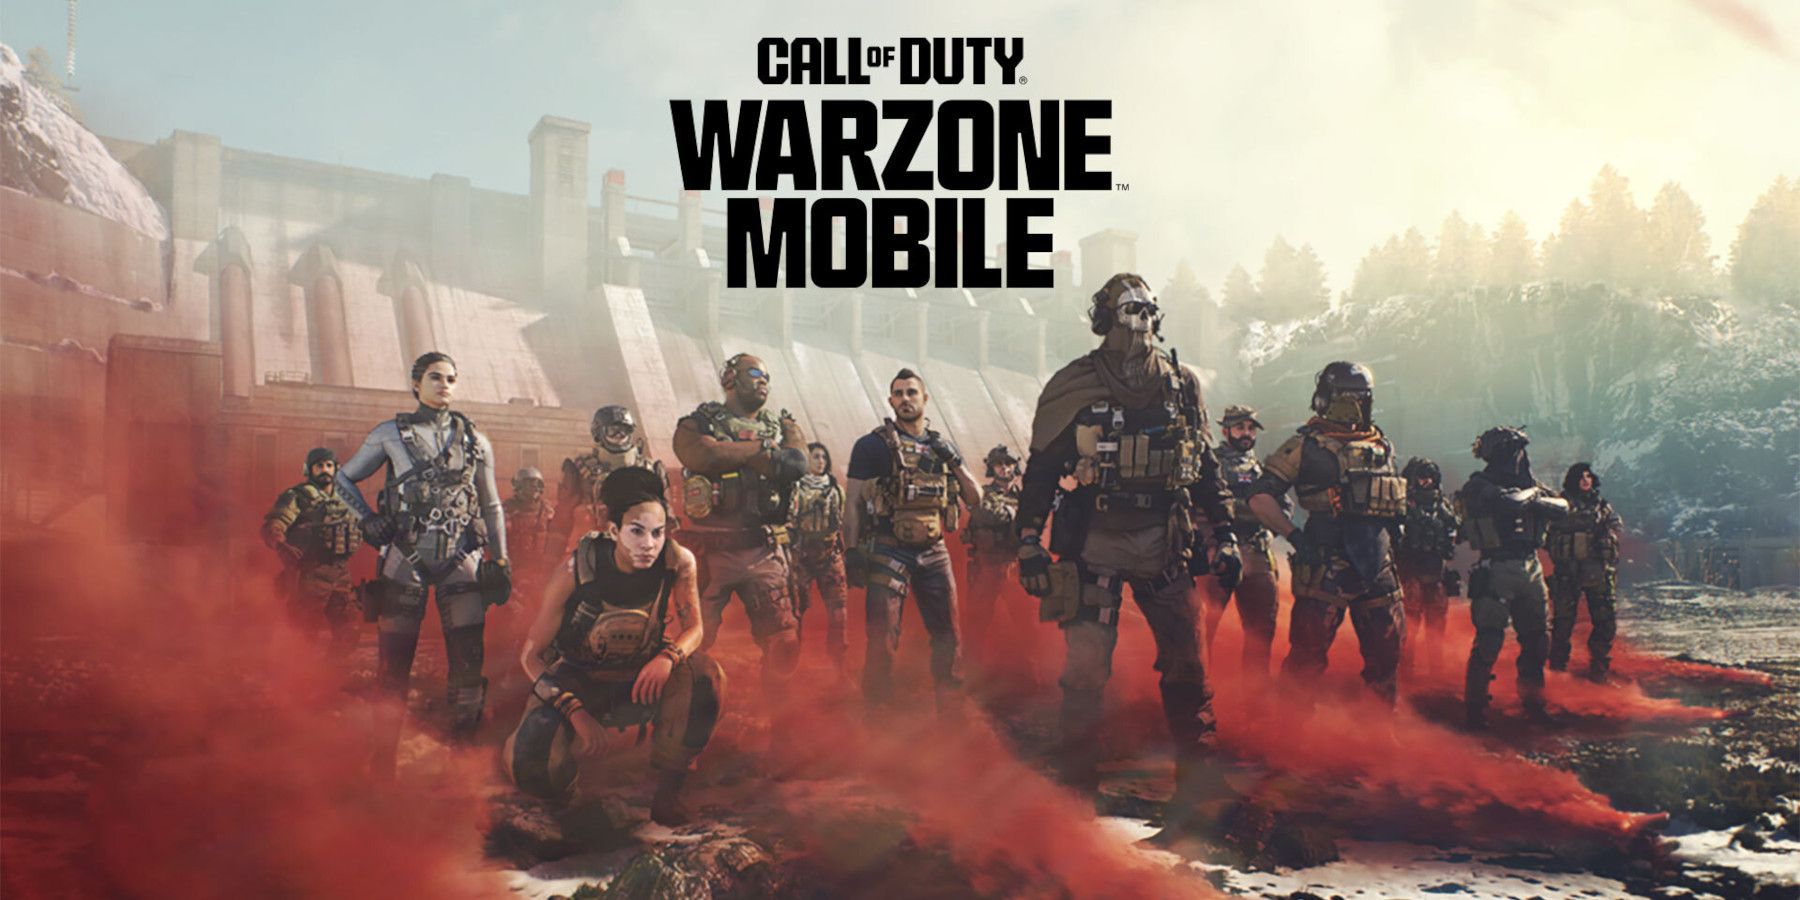 Call of Duty Warzone Mobile Art